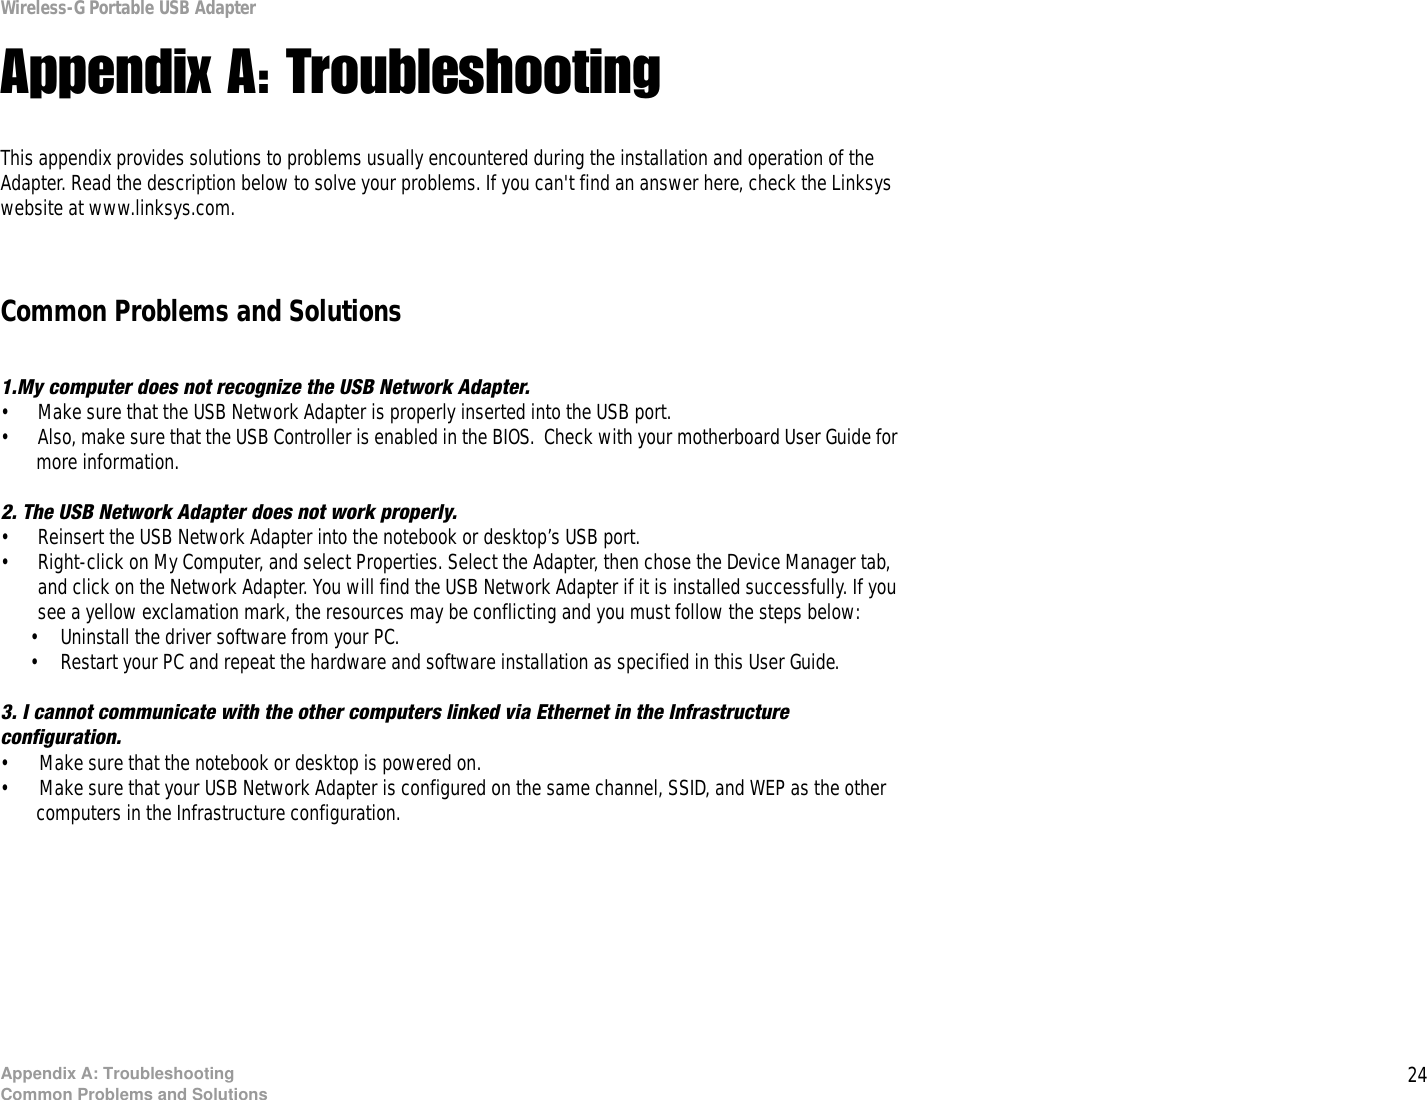 24Appendix A: TroubleshootingCommon Problems and SolutionsWireless-G Portable USB AdapterAppendix A: TroubleshootingThis appendix provides solutions to problems usually encountered during the installation and operation of the Adapter. Read the description below to solve your problems. If you can&apos;t find an answer here, check the Linksys website at www.linksys.com.Common Problems and Solutions1.My computer does not recognize the USB Network Adapter.• Make sure that the USB Network Adapter is properly inserted into the USB port.• Also, make sure that the USB Controller is enabled in the BIOS.  Check with your motherboard User Guide for more information.2. The USB Network Adapter does not work properly.• Reinsert the USB Network Adapter into the notebook or desktop’s USB port. • Right-click on My Computer, and select Properties. Select the Adapter, then chose the Device Manager tab, and click on the Network Adapter. You will find the USB Network Adapter if it is installed successfully. If you see a yellow exclamation mark, the resources may be conflicting and you must follow the steps below:• Uninstall the driver software from your PC.• Restart your PC and repeat the hardware and software installation as specified in this User Guide.3. I cannot communicate with the other computers linked via Ethernet in the Infrastructure configuration.• Make sure that the notebook or desktop is powered on.• Make sure that your USB Network Adapter is configured on the same channel, SSID, and WEP as the other computers in the Infrastructure configuration. 